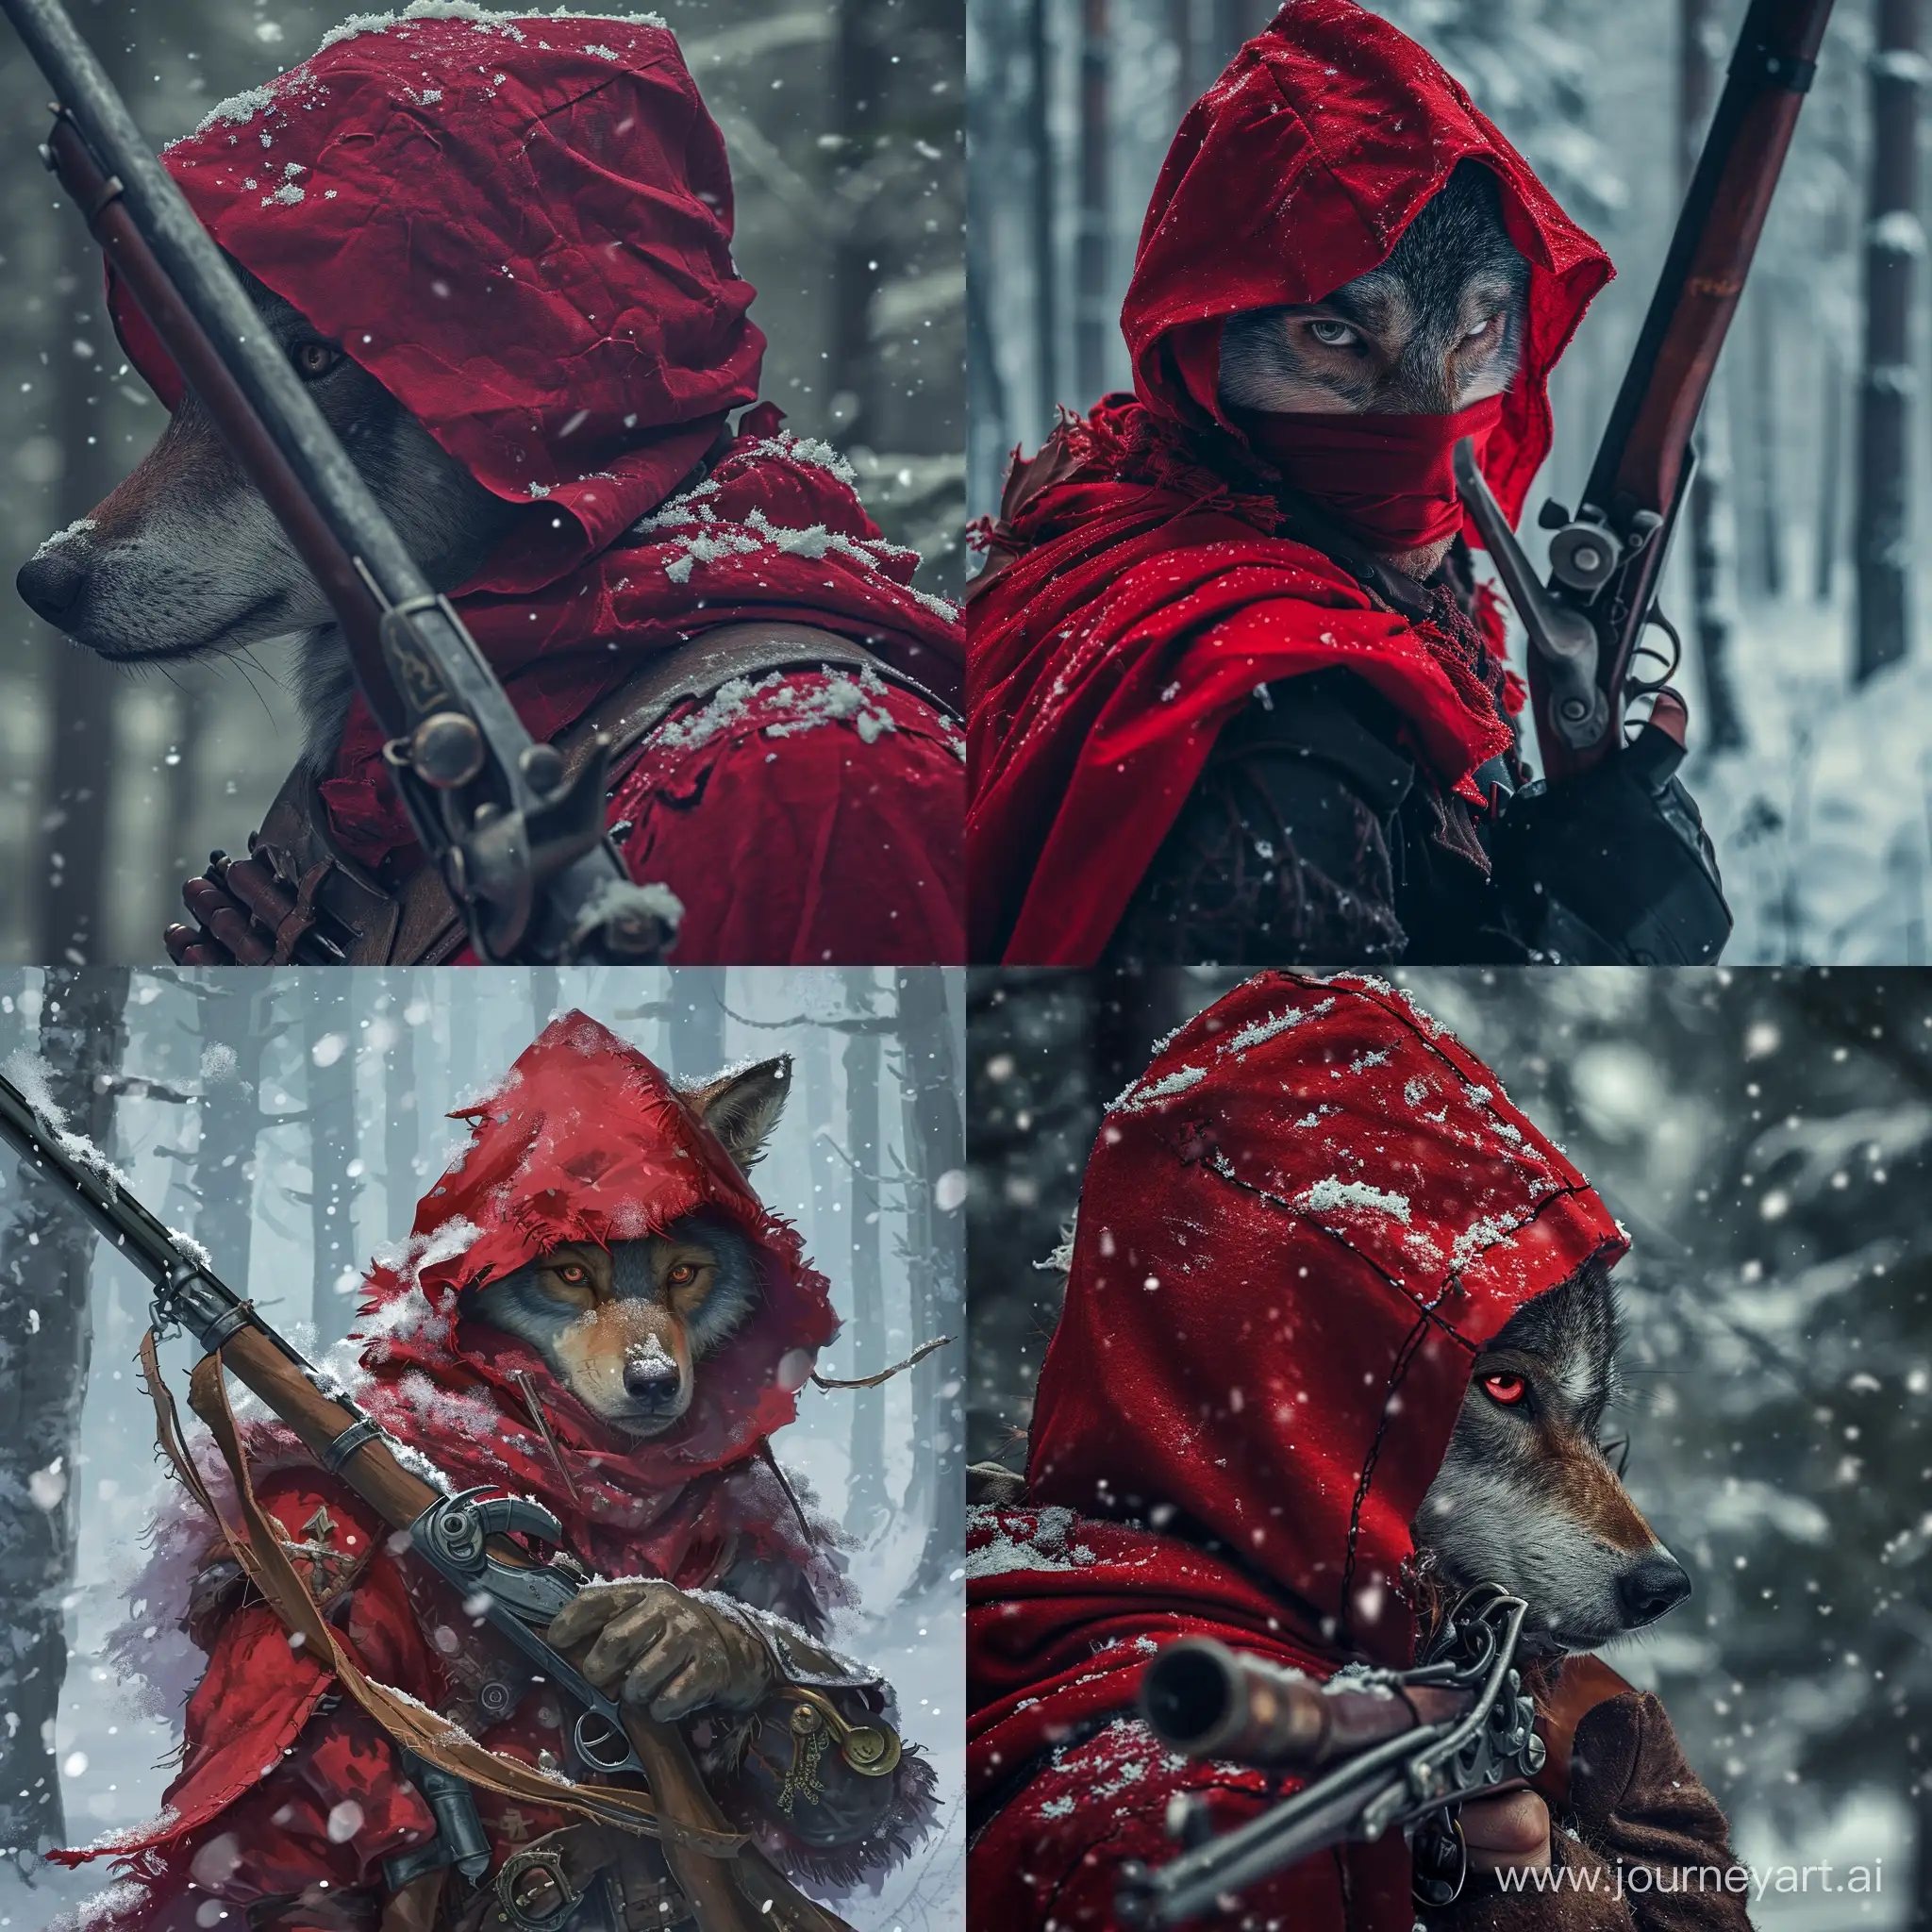 Bandit with musket in red hood, and he has left wolf eye. Snow fantasy forest.
